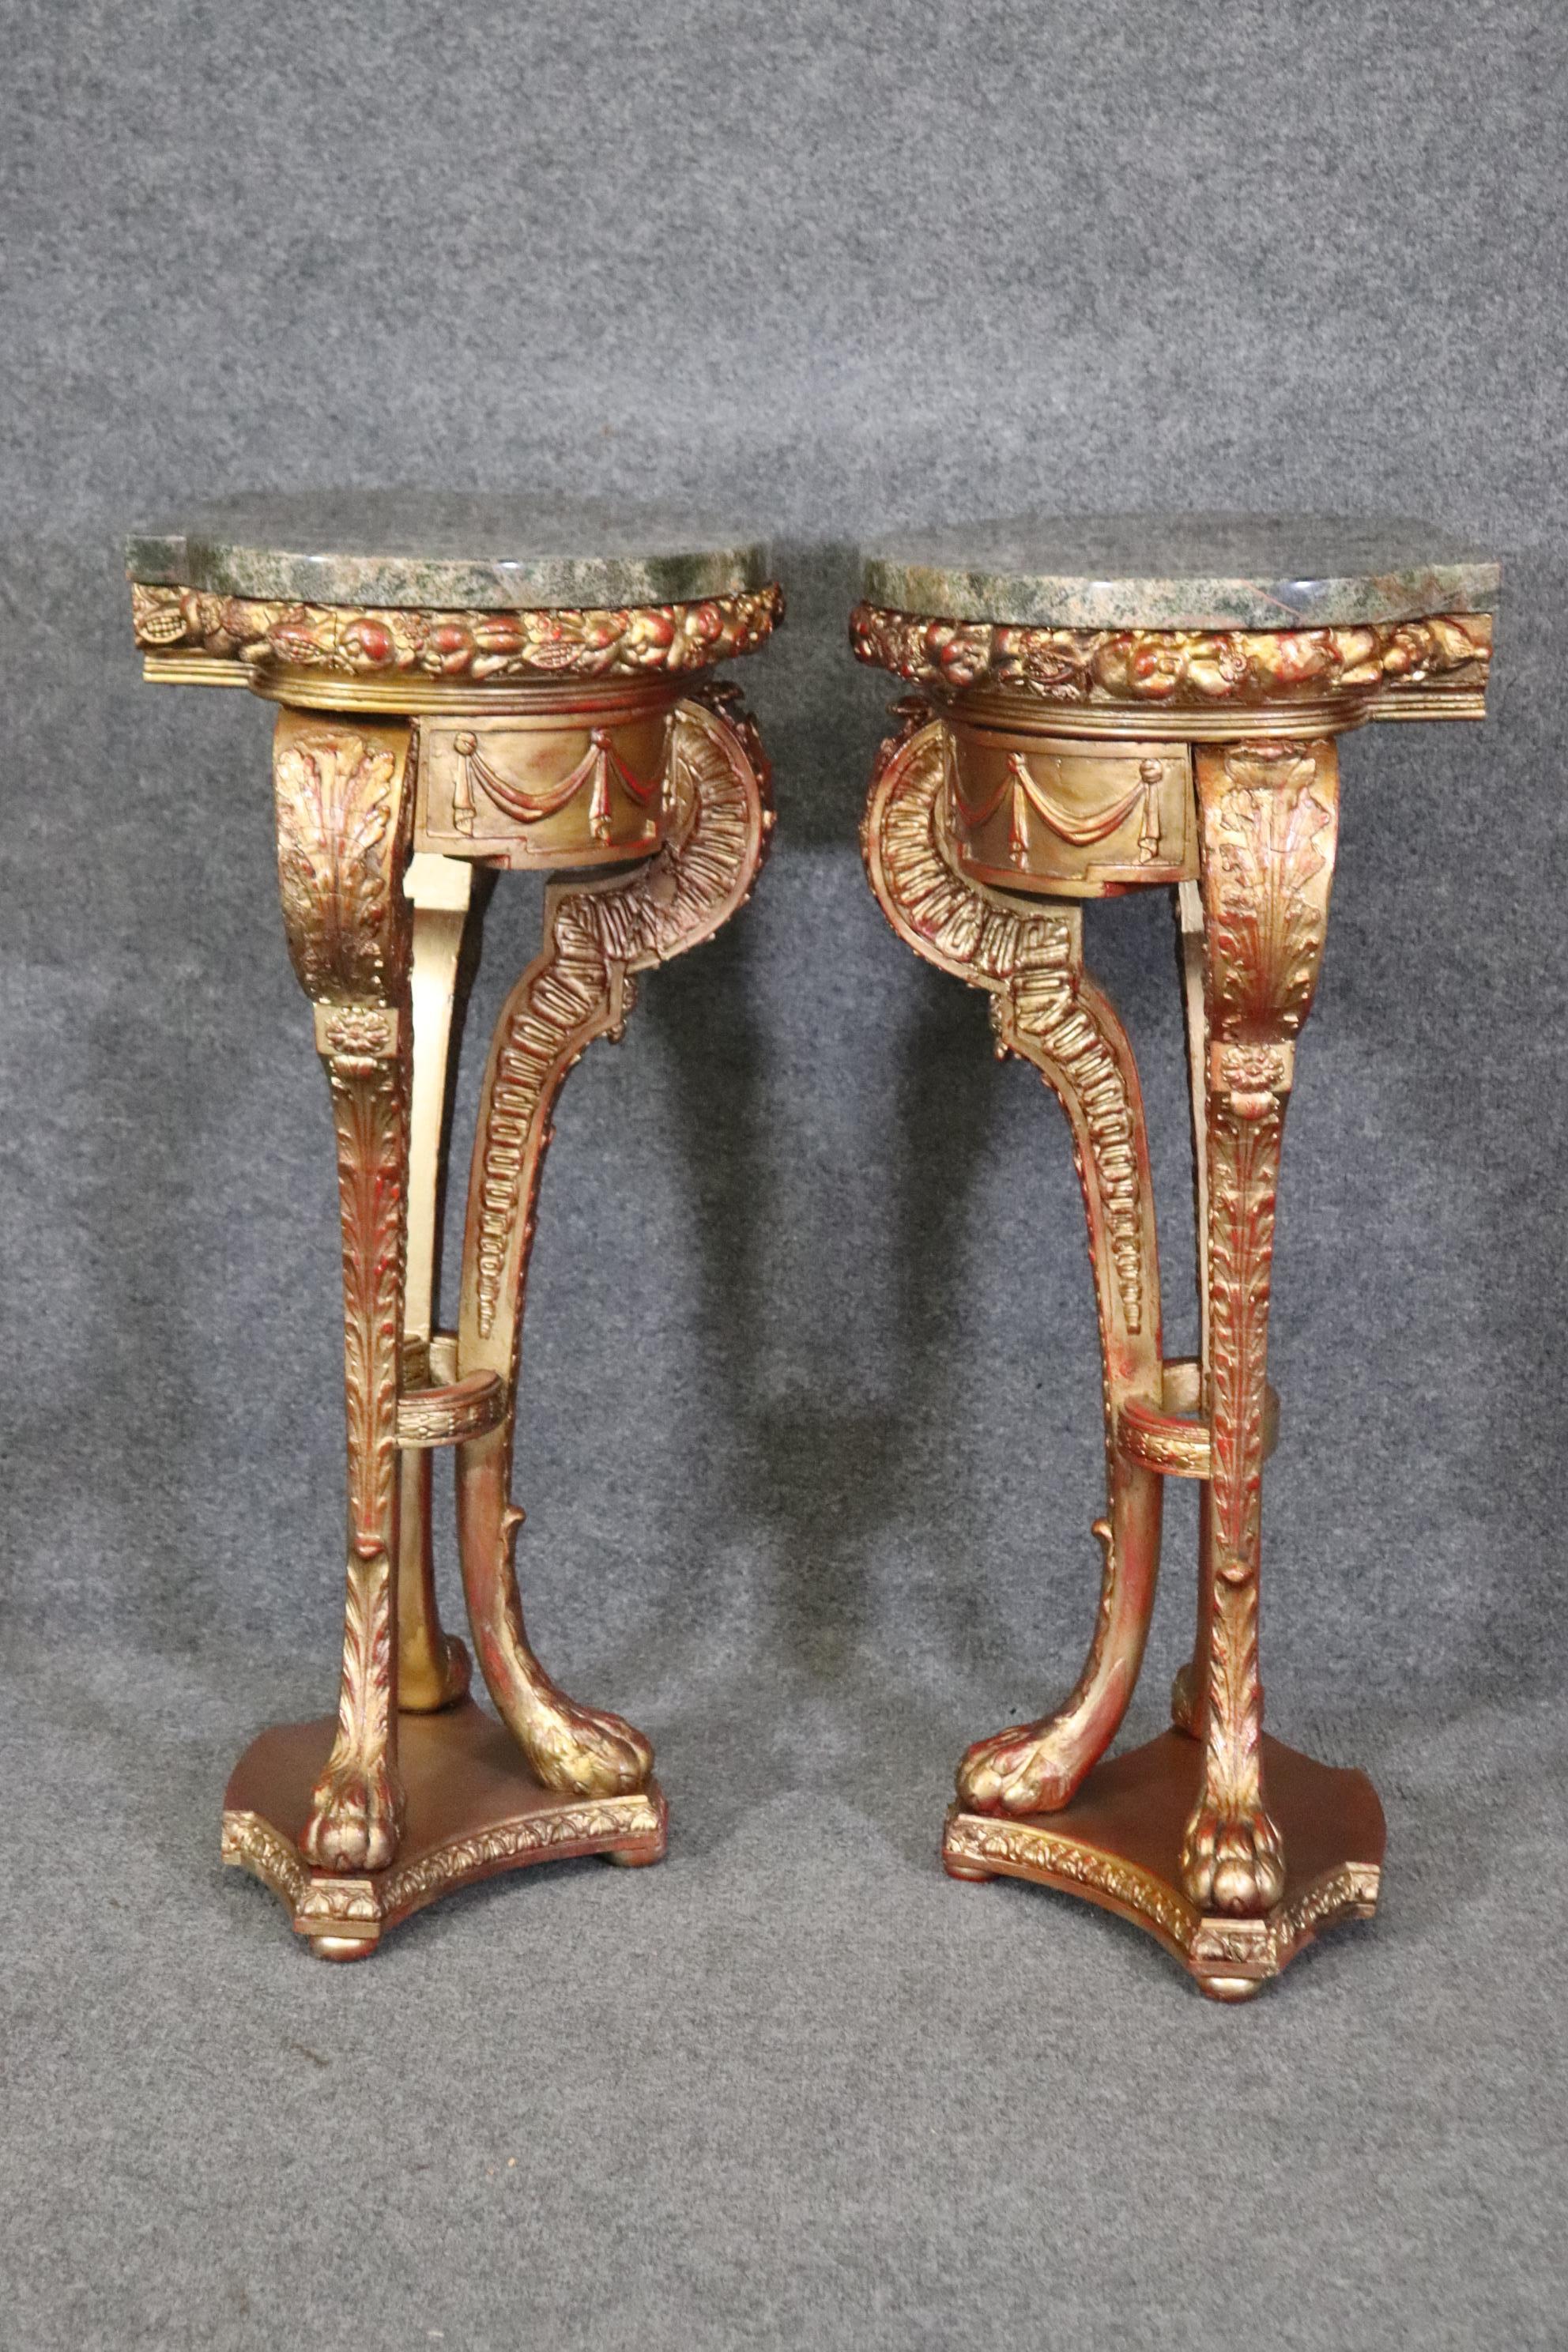 Superb Pair Gilded French Carved Louis XV Style Verdi Marble Top Pedestals  5